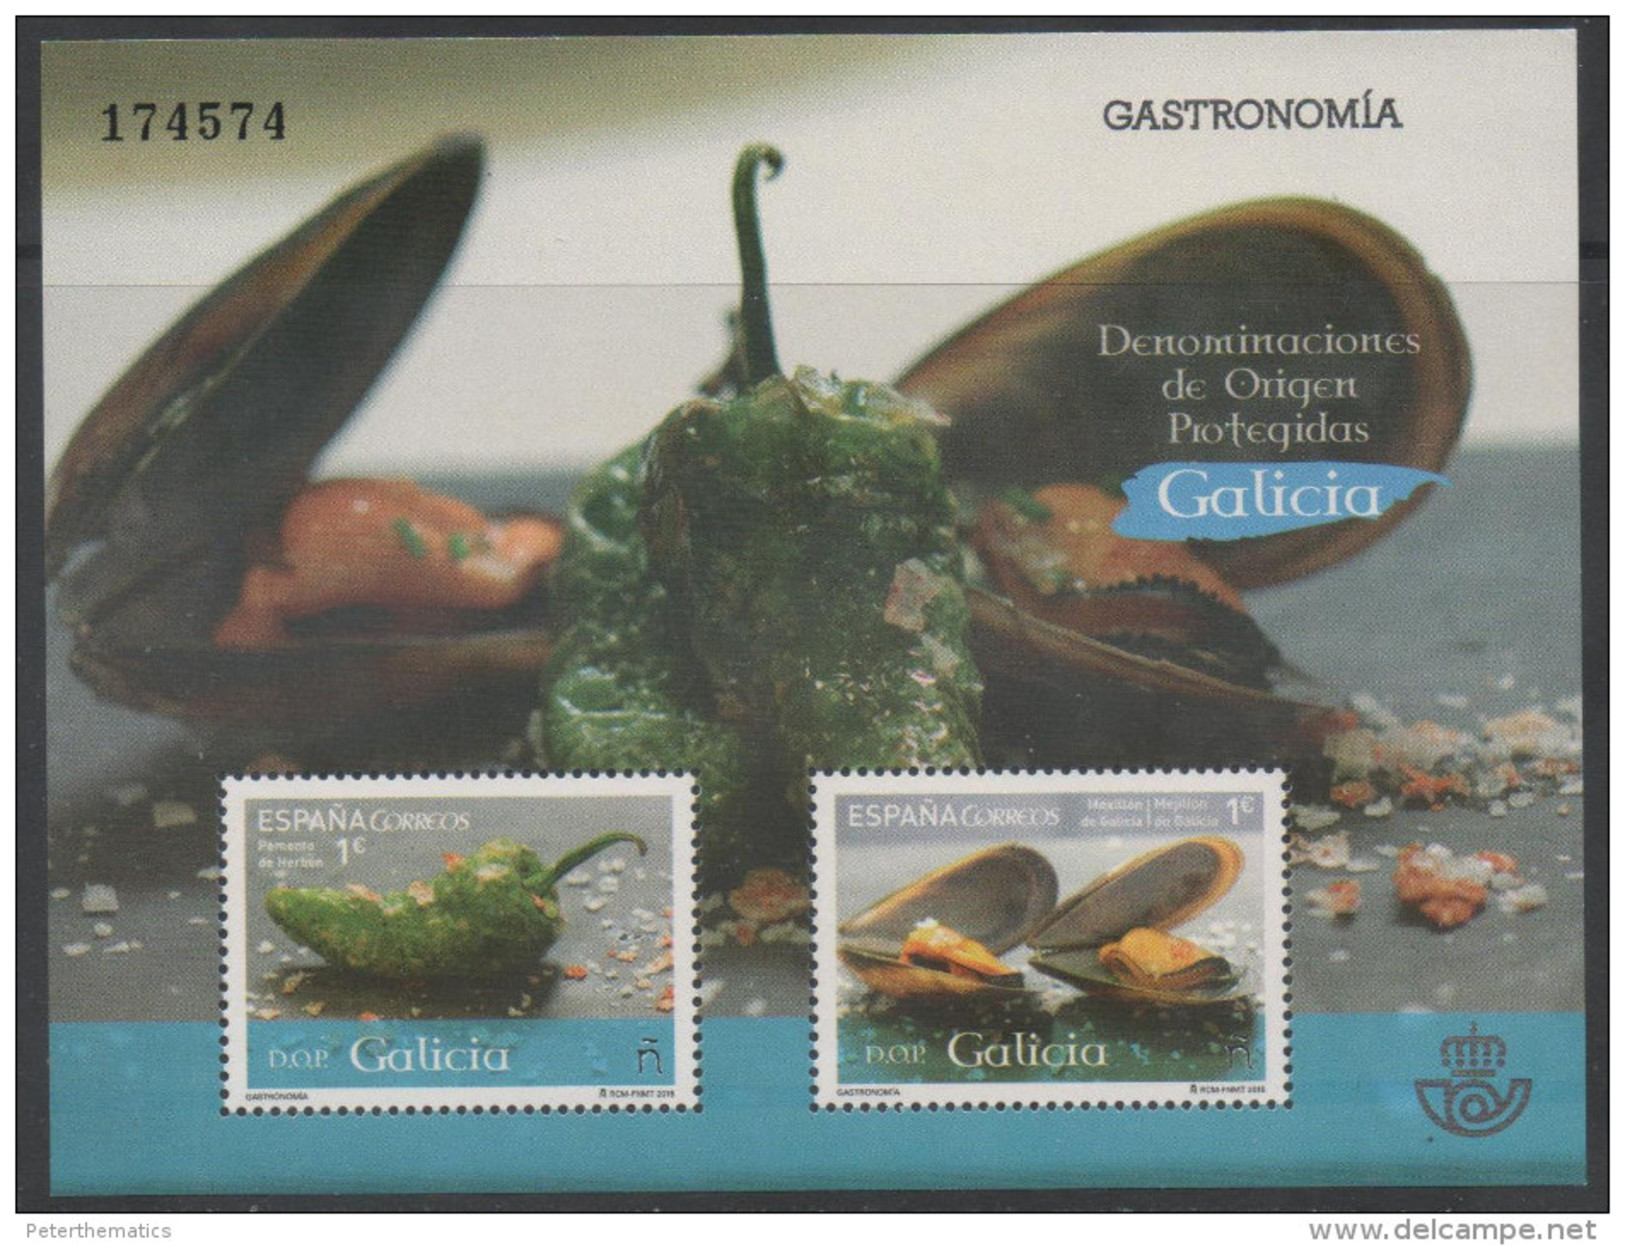 SPAIN, 2015, MNH, FOOD, GALICIAN SPECIALTIES, SEAFOOD, MUSSELS, VEGETABLES, GREEN PEPPERS, S/SHEET - Food